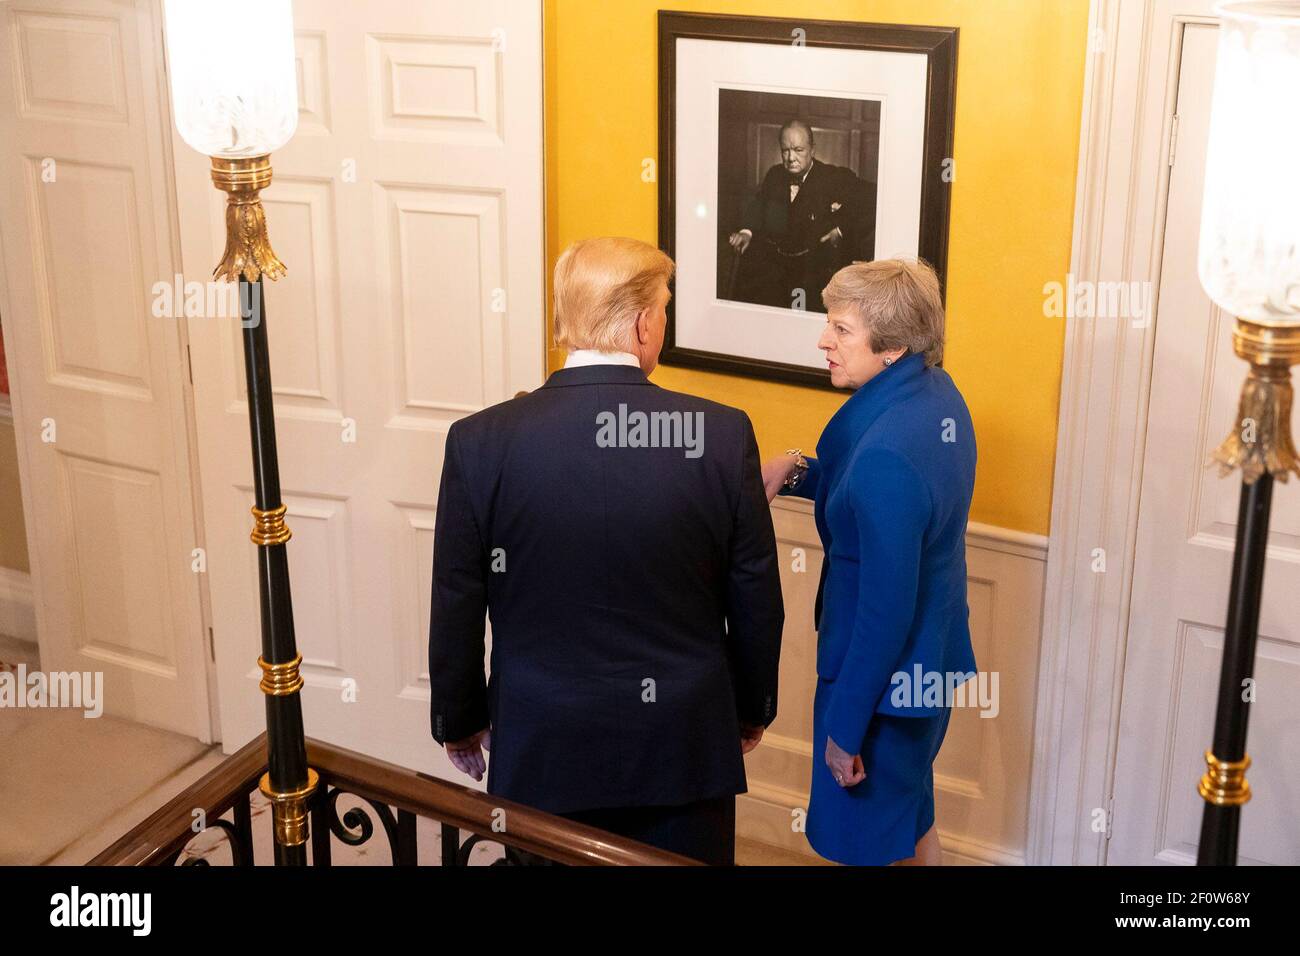 President Donald Trump and British Prime Minister Theresa May talk in front of a portrait of British Prime Minister Winston Churchill Tuesday June 4 2019 at No. 10 Downing Street in London. Stock Photo